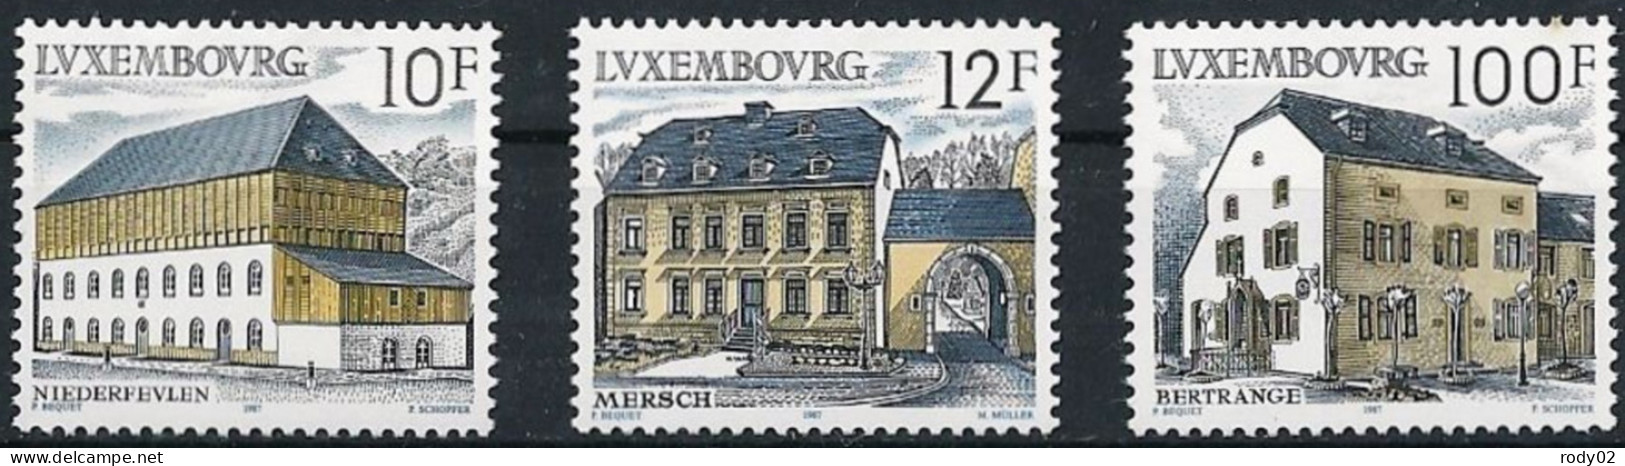 LUXEMBOURG - ARCHITECTURE - N° 1130 A 1132 ET CARNET N° 1338 - NEUF** MNH - Booklets